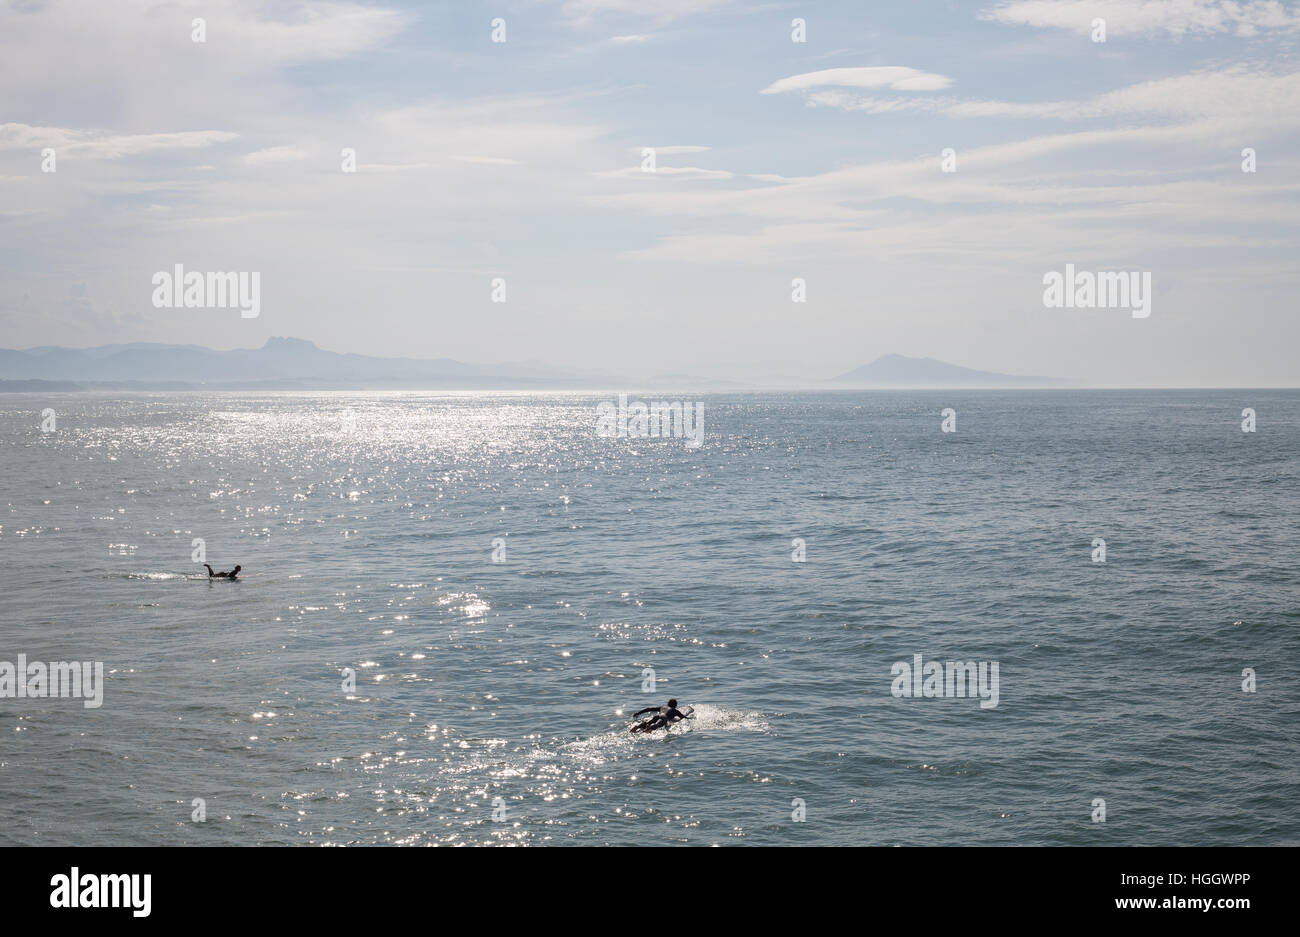 Surfers paddling out into the sea at Biarritz, France. Stock Photo